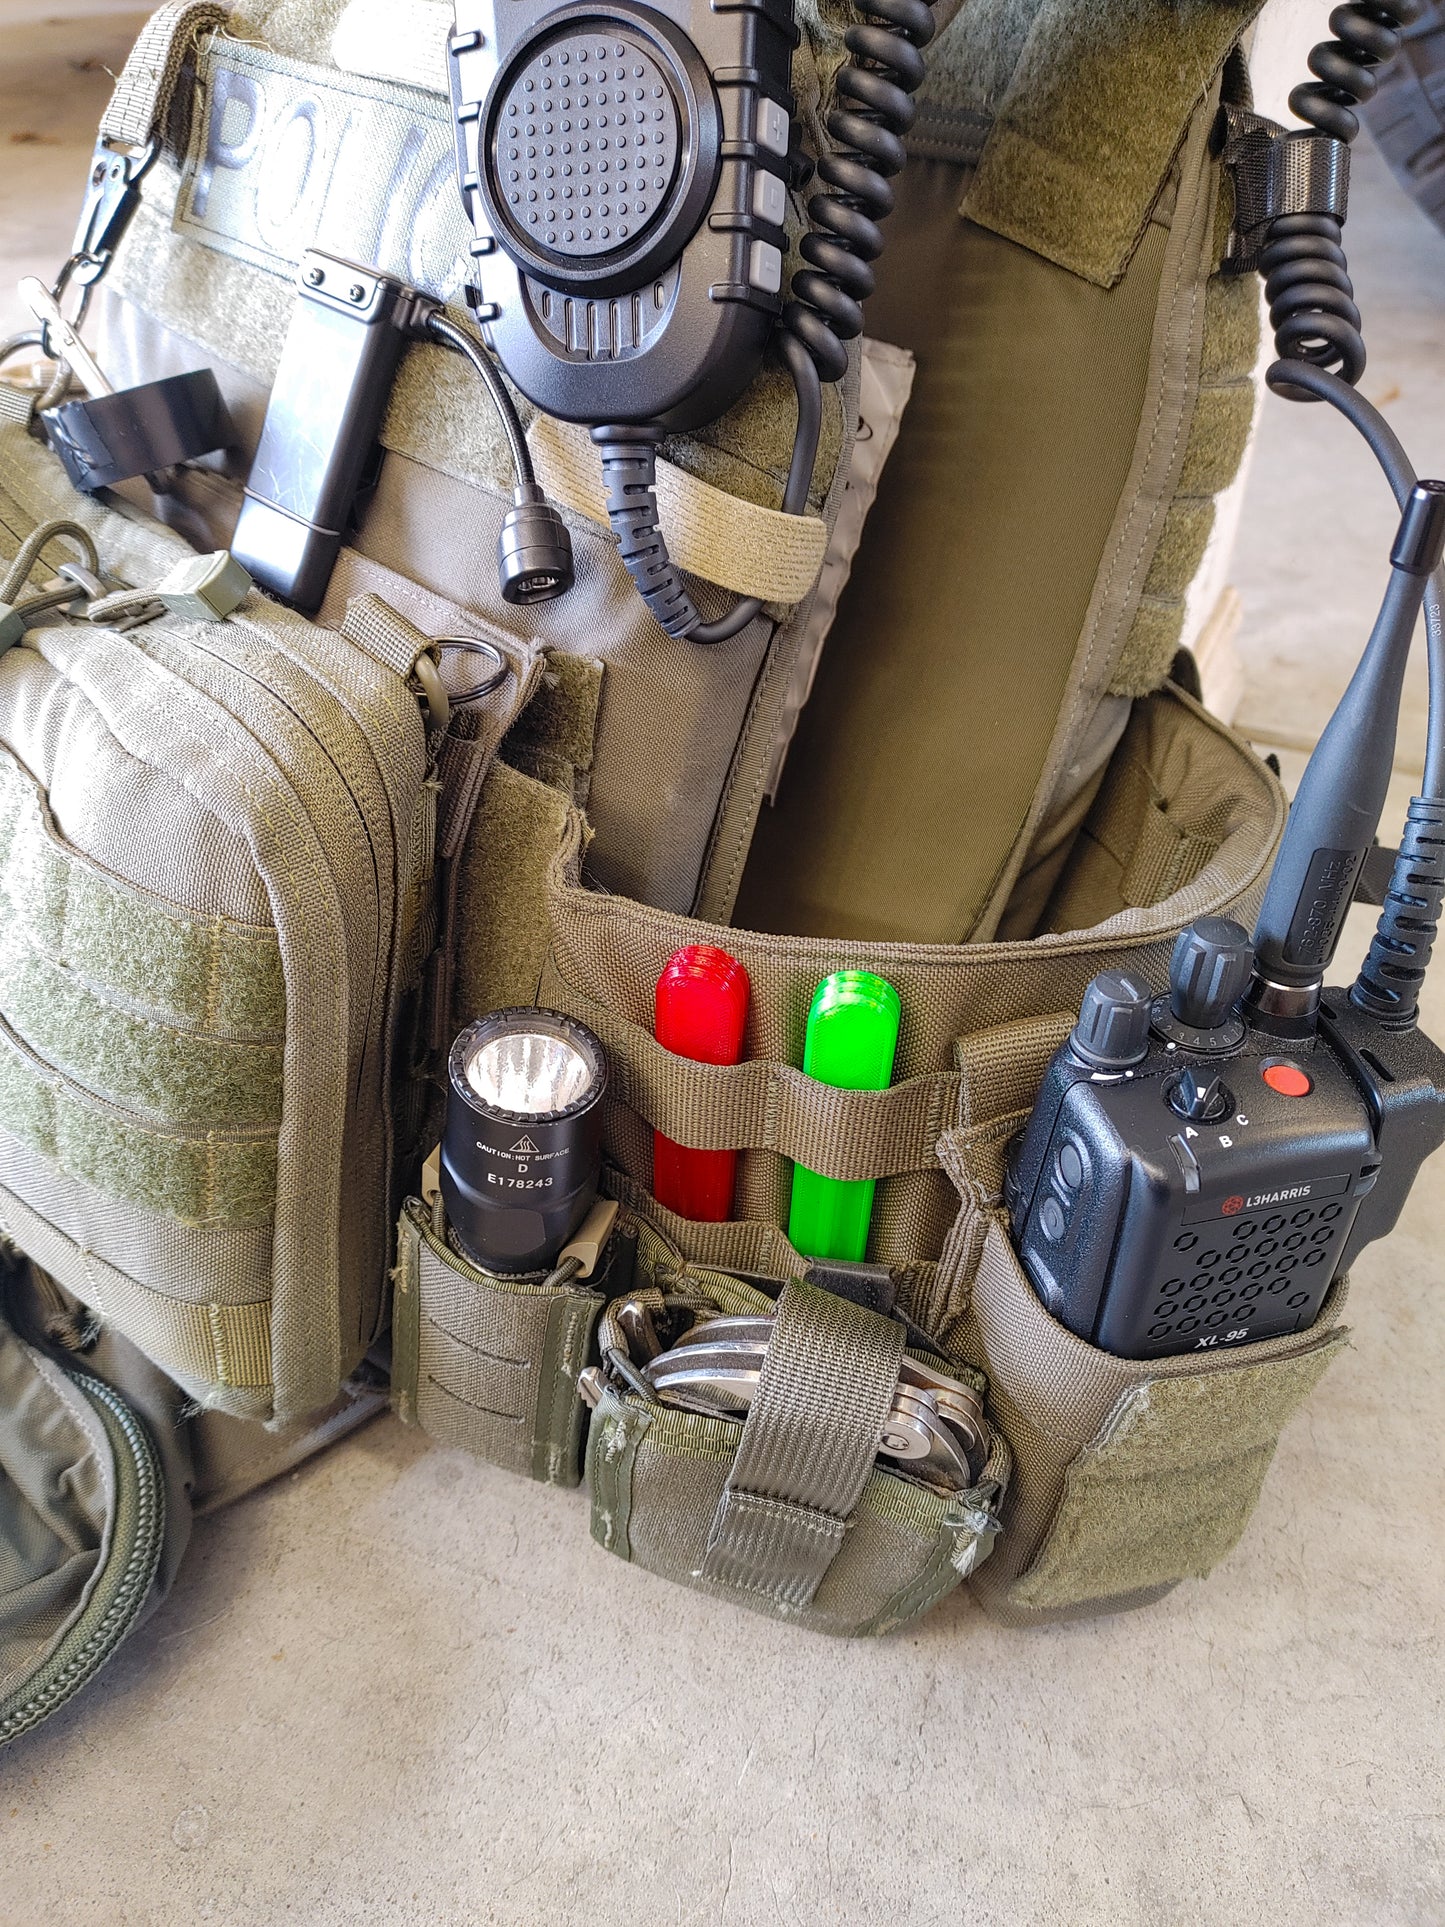 Tactical Crisis Response Markers for Bomb Technicians and S.W.A.T. Operators